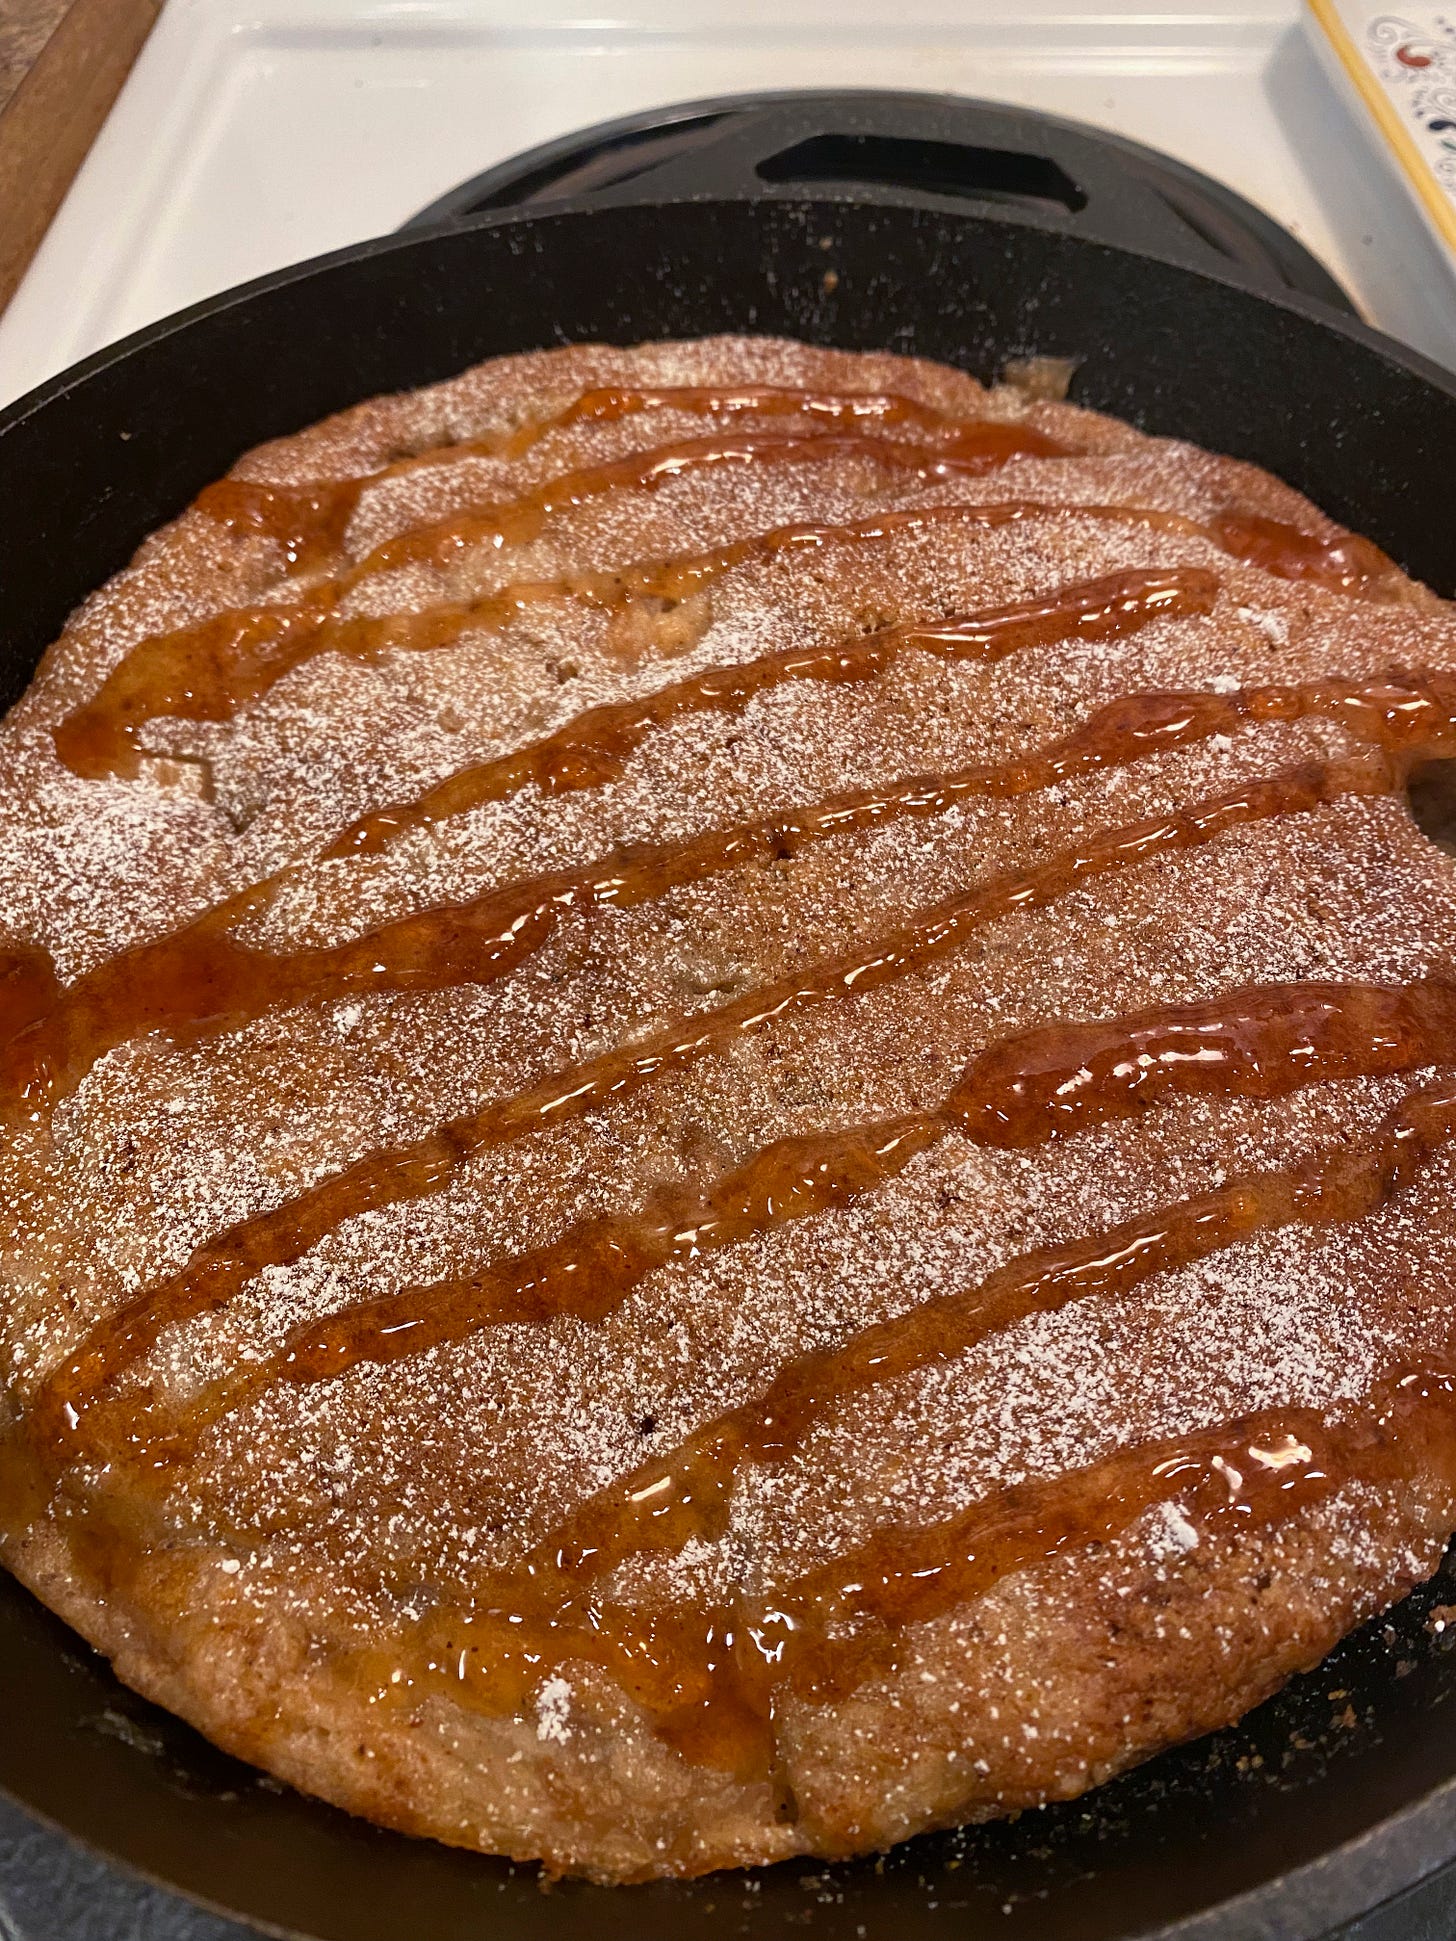 In a cast iron pan, a golden-brown apple cake. On top is a drizzle of syrup and a dusting of powdered sugar.